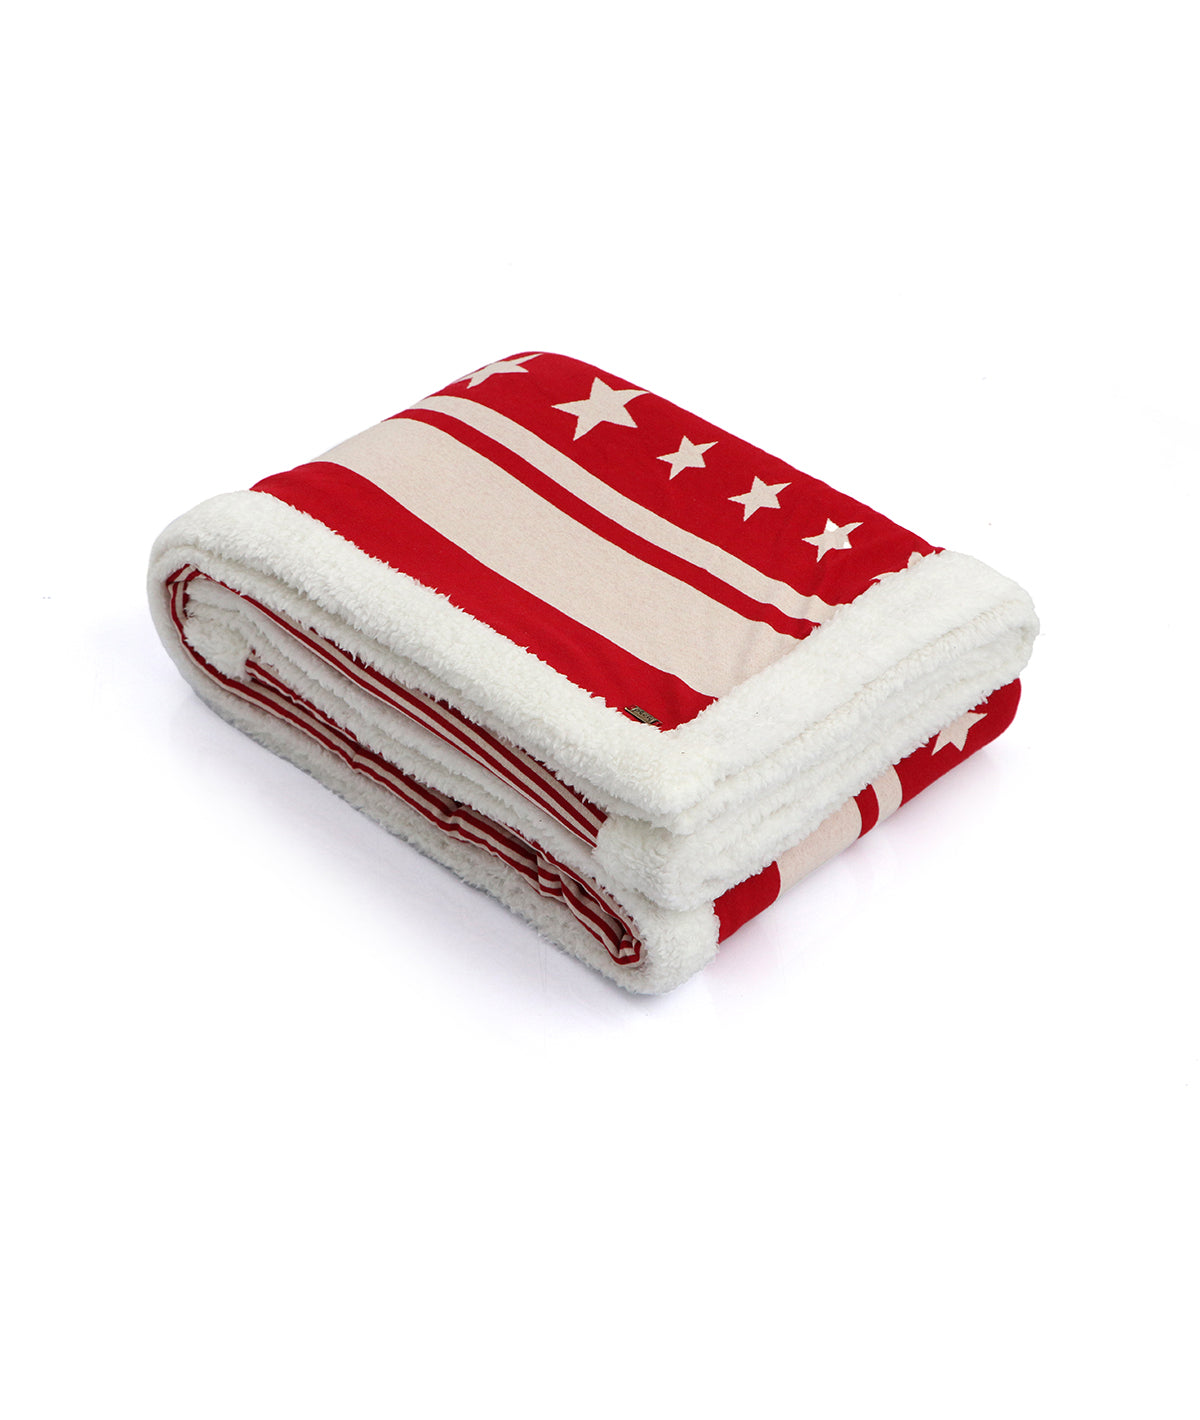 Stripe Star Red & Natural Cotton Knitted Single Bed Blanket layered with Warm Sherpa Fabric